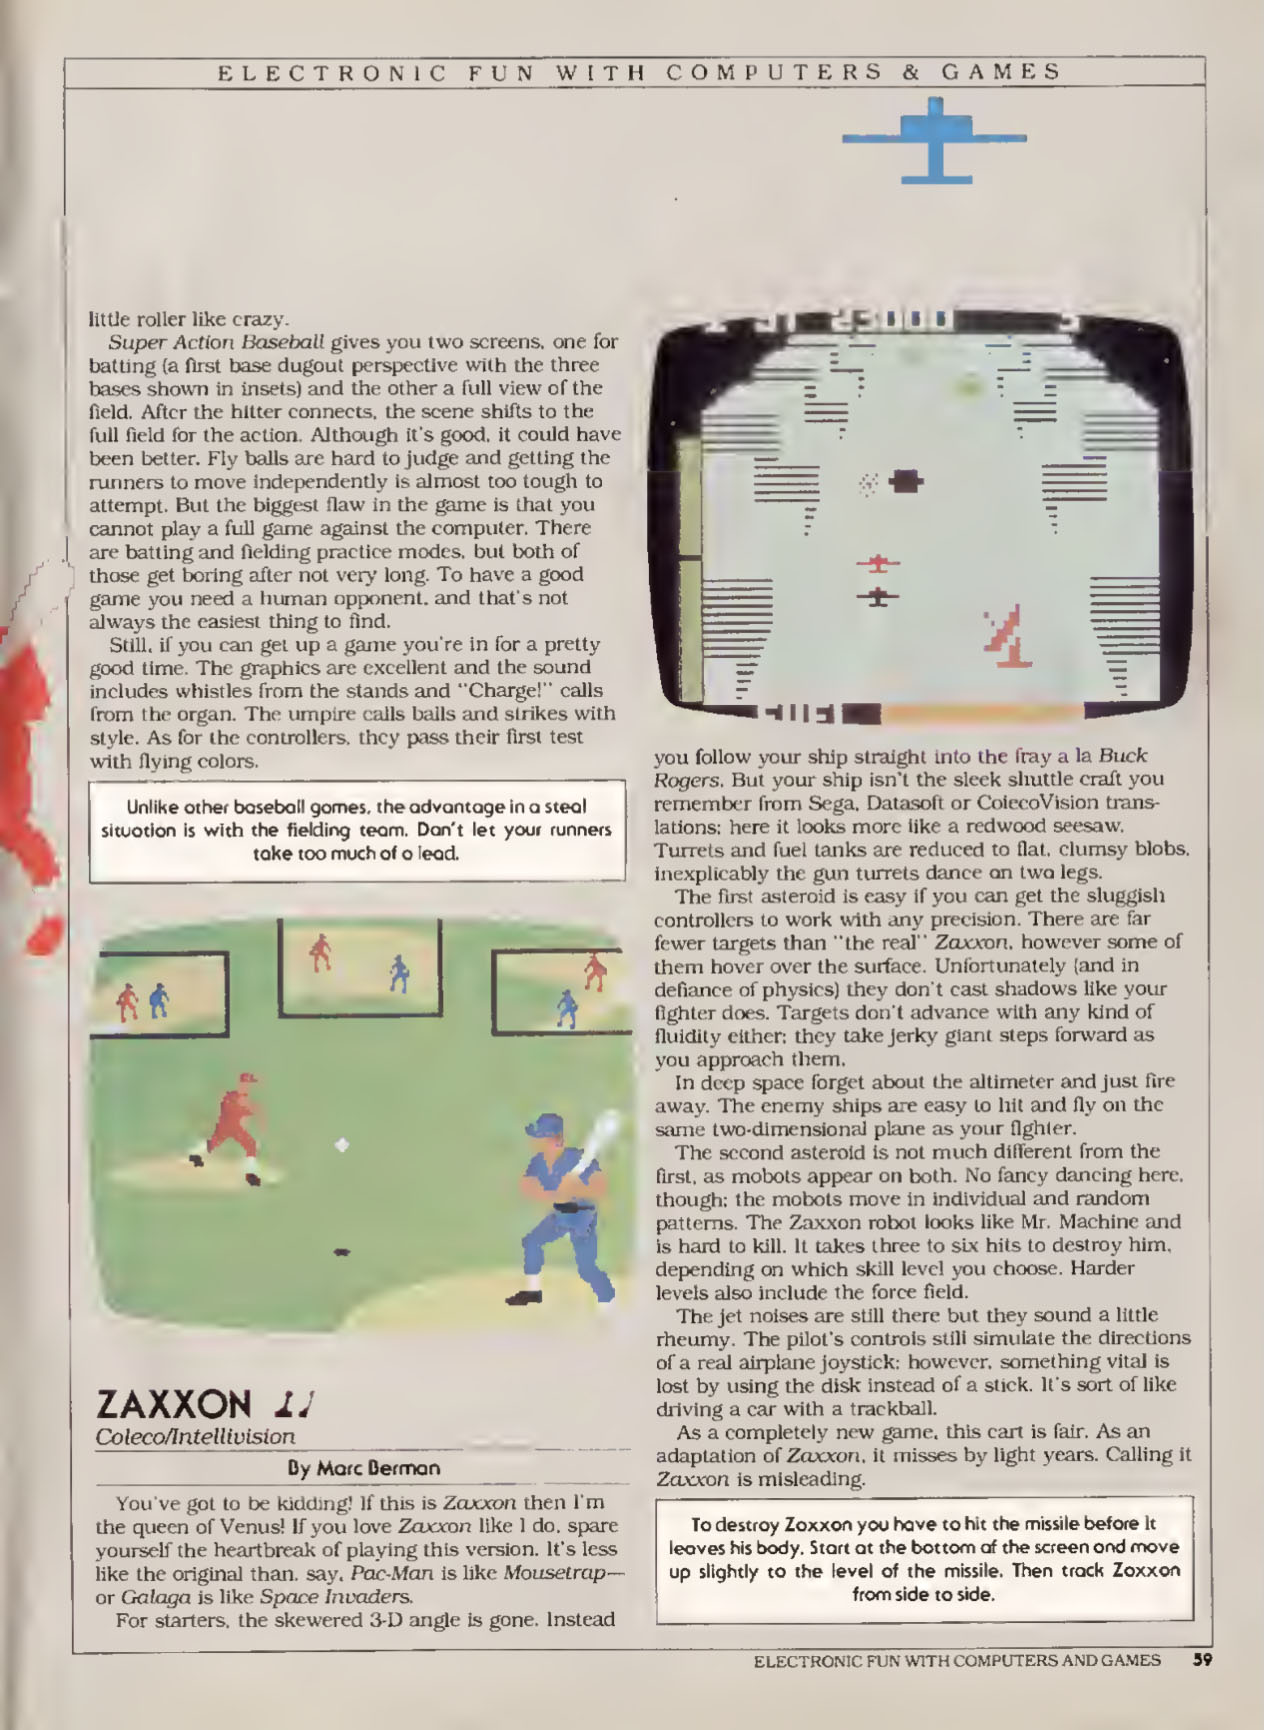 Super Action Baseball Review, Electronic Fun with Computer & Video Games January 1984 page 59